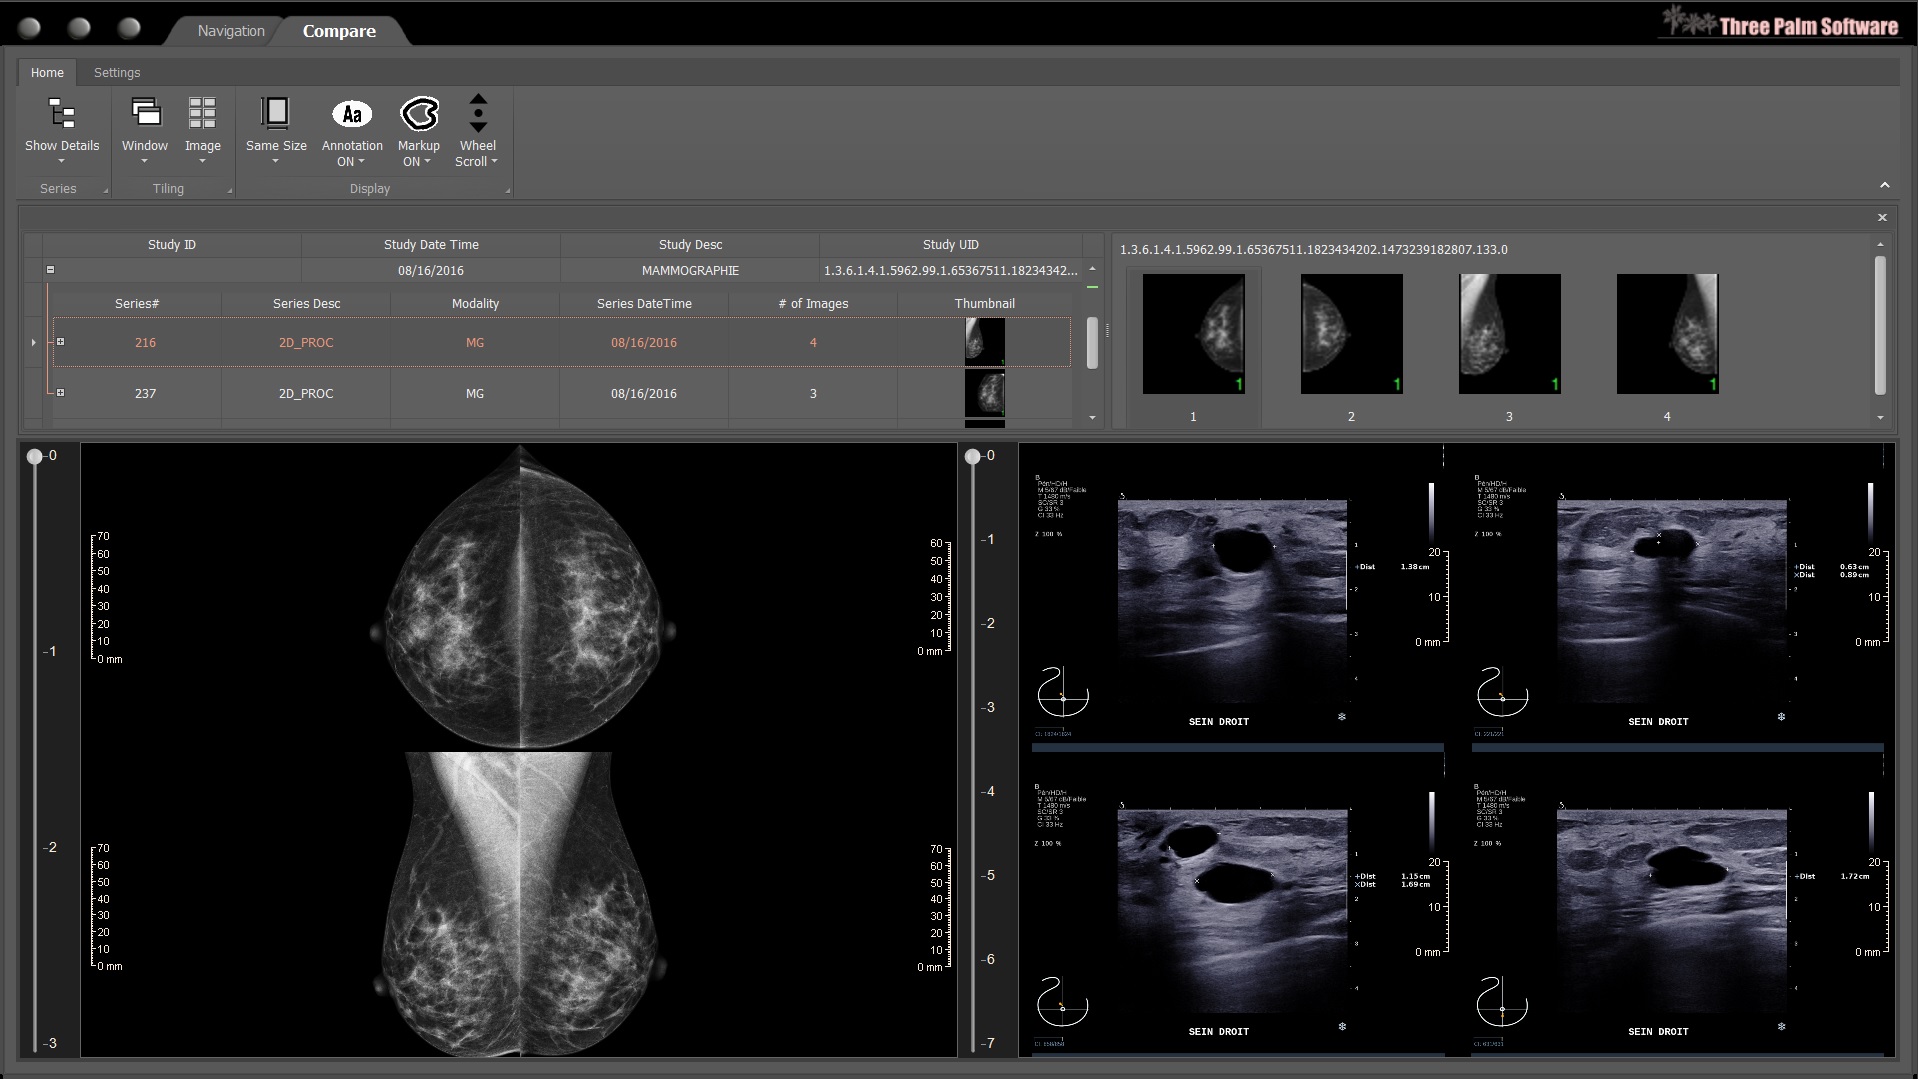 Included plug-in comparison viewer for any combination of modalities.